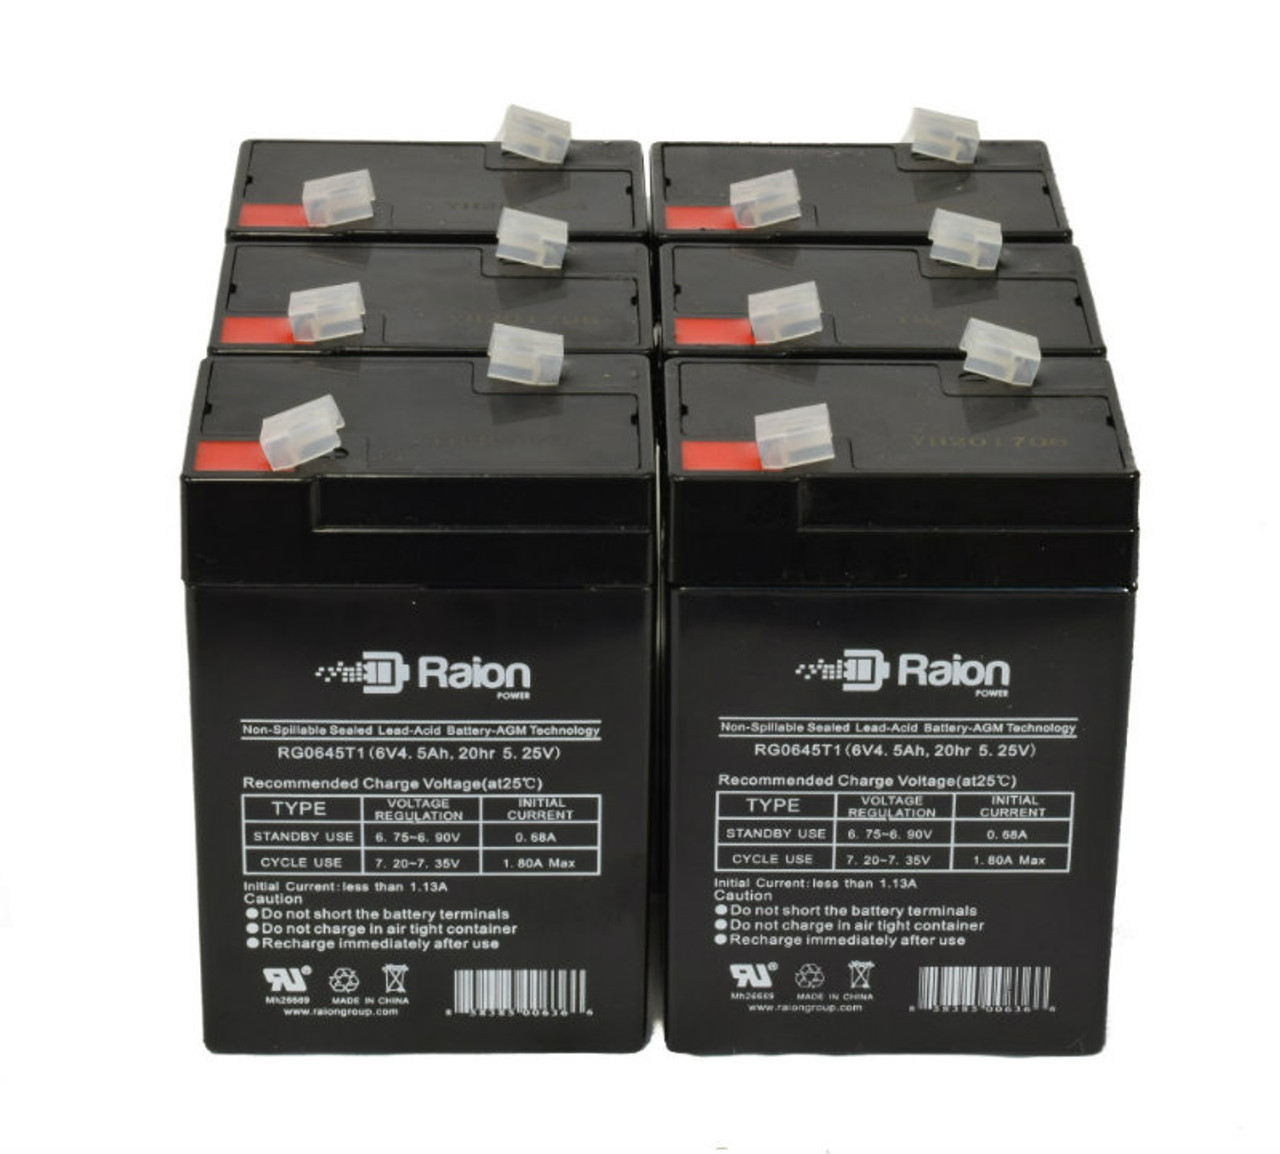 Raion Power 6 Volt 4.5Ah RG0645T1 Replacement Battery for CSB CP640 - 6 Pack